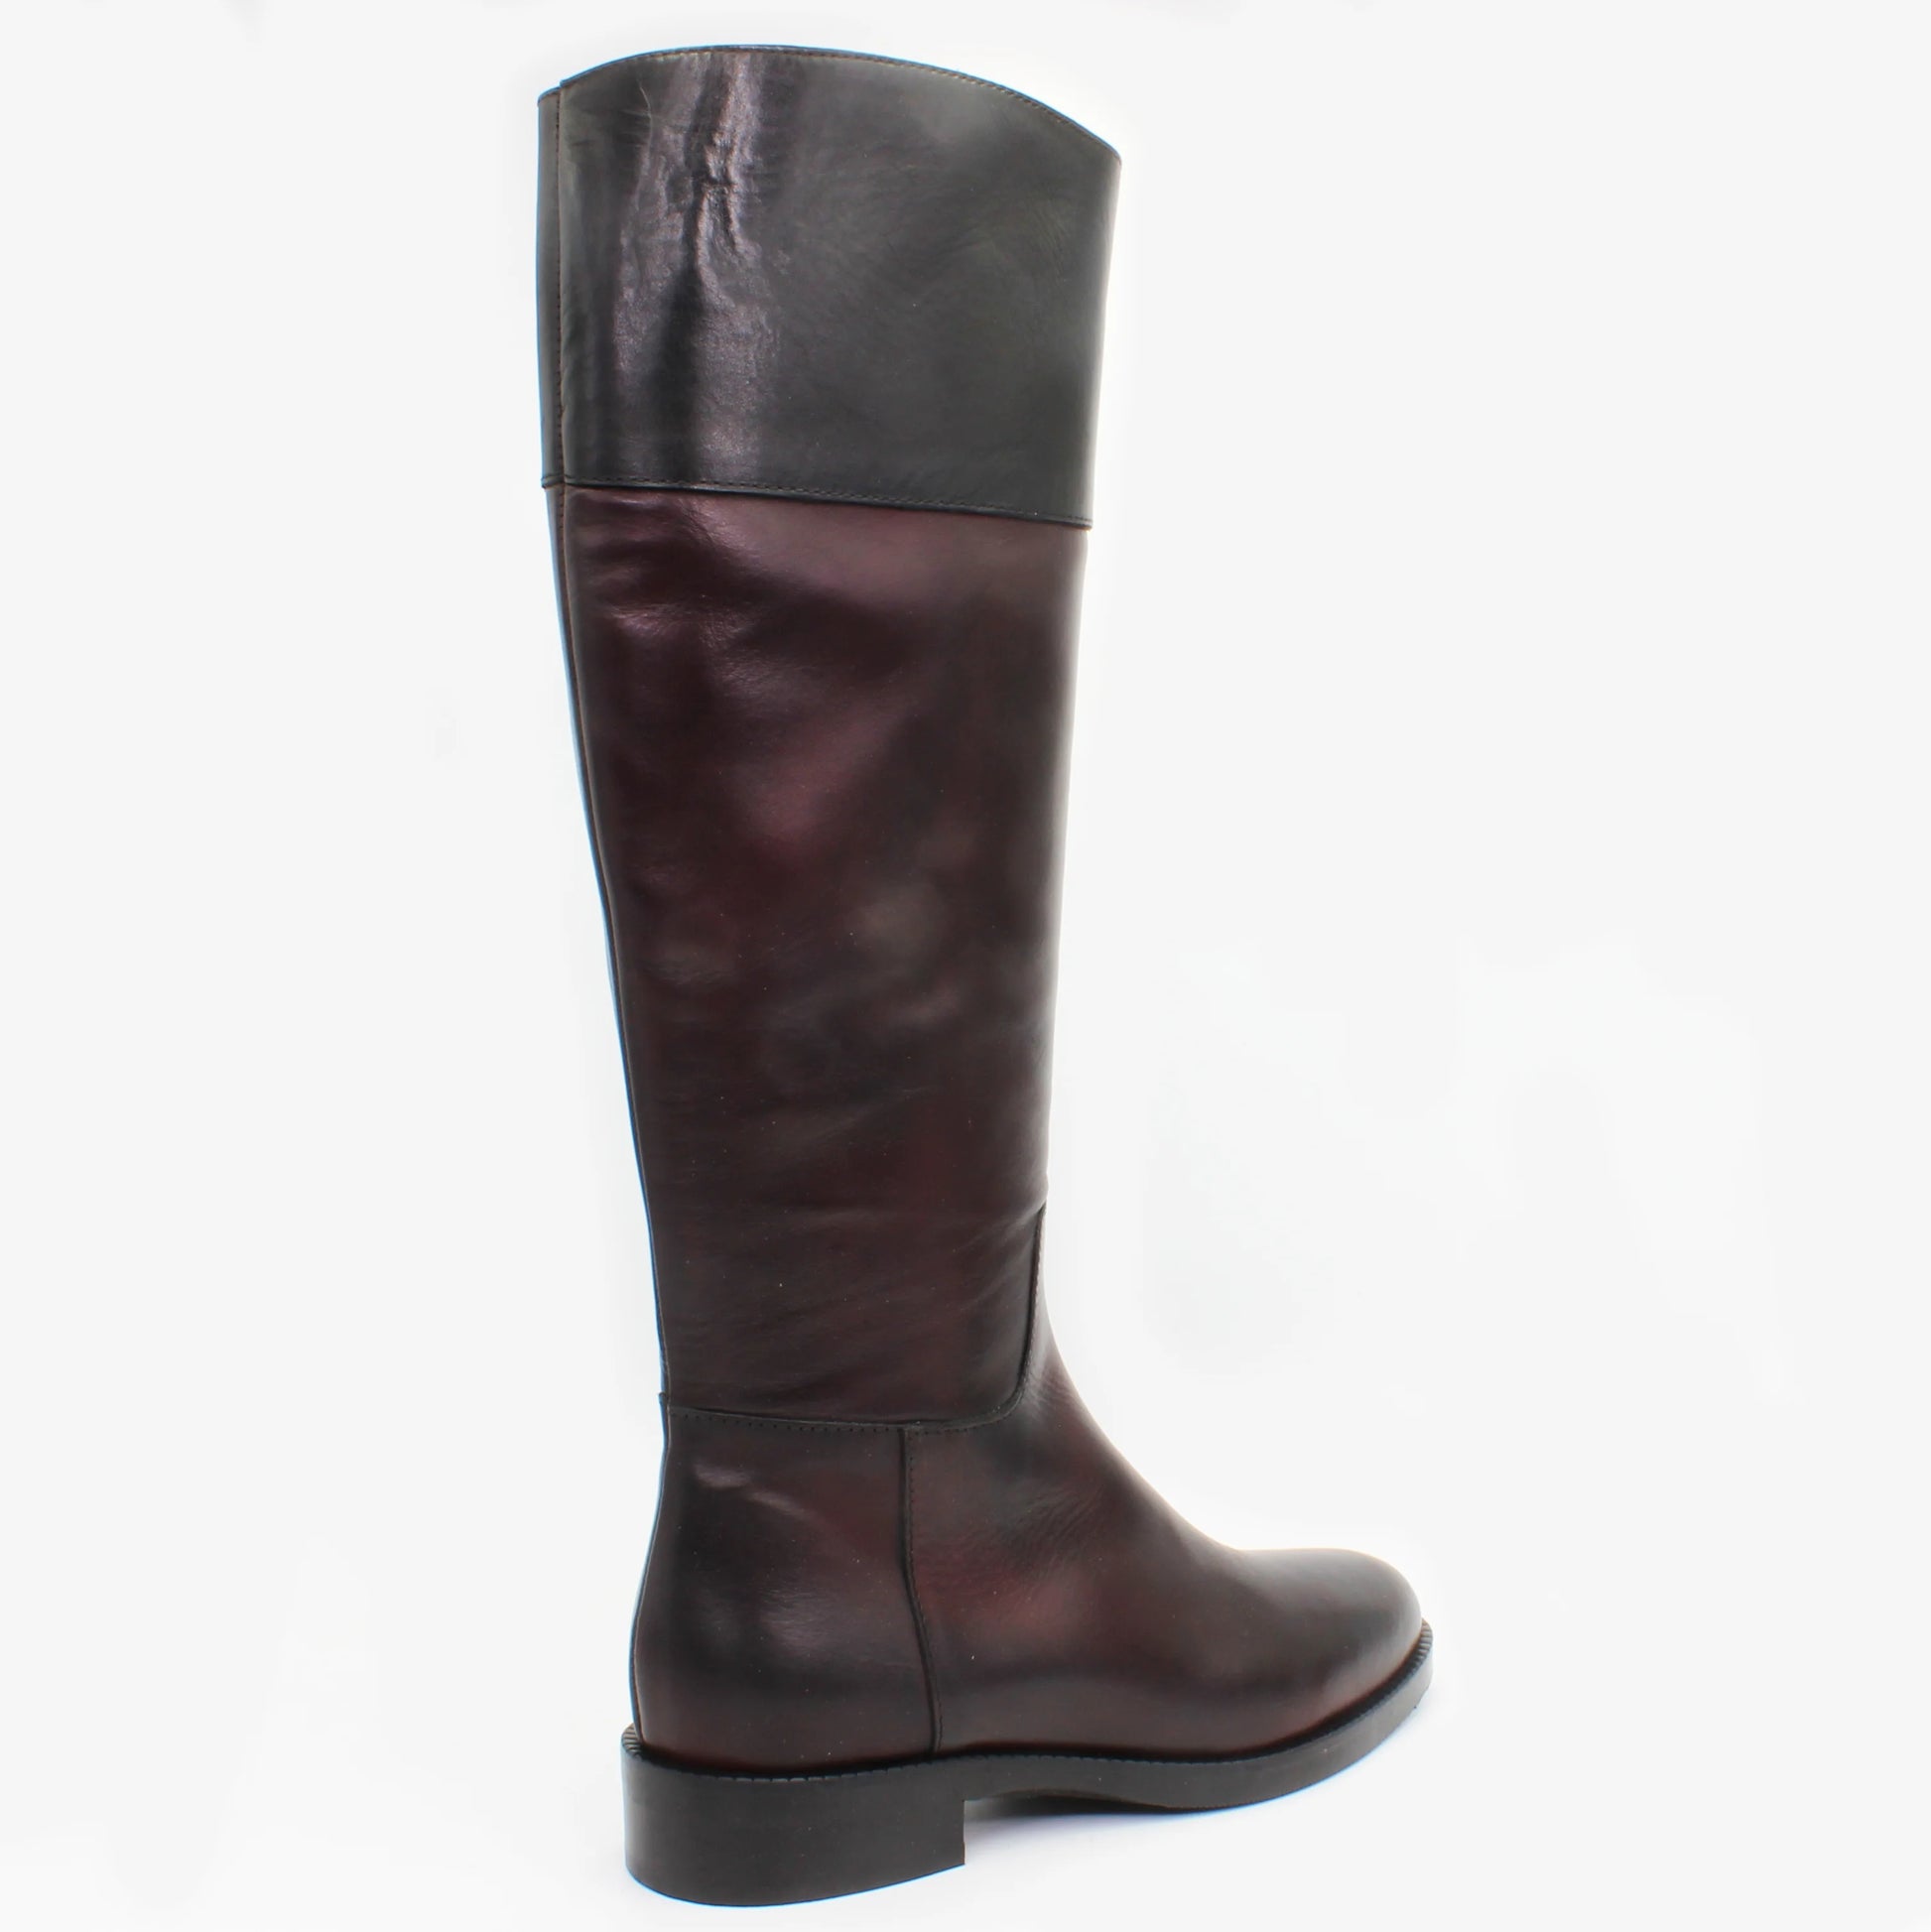 Shop Handmade Italian Leather Equestrian Boot in Burgundy and Nero (GC2060) or browse our range of hand-made Italian boots for women in leather or suede in-store at Aliverti Cape Town, or shop online. We deliver in South Africa & offer multiple payment plans as well as accept multiple safe & secure payment methods.